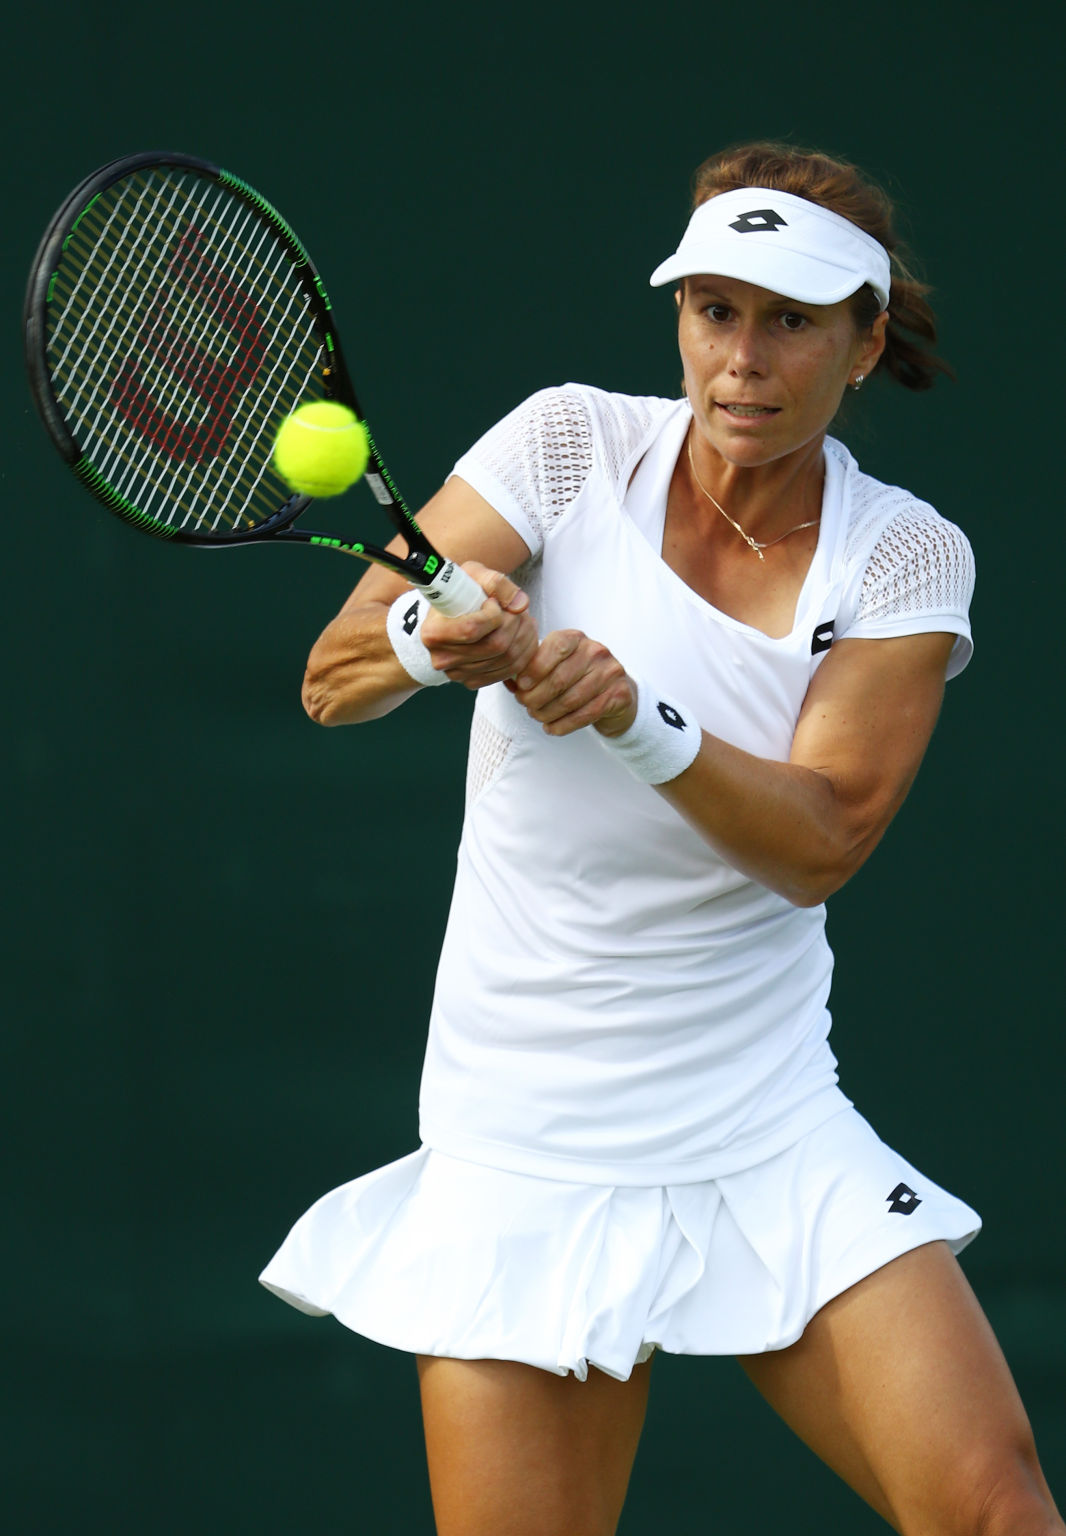 LONDON, ENGLAND - JUNE 27:  Varvara Lepchenko of The United States plays a forehand shot during the Men's Singles first round match against Teliana Pereira of Brazil on day one of the Wimbledon Lawn Tennis Championships at the All England Lawn Tennis and Croquet Club on June 27th, 2016 in London, England.  (Photo by Julian Finney/Getty Images)